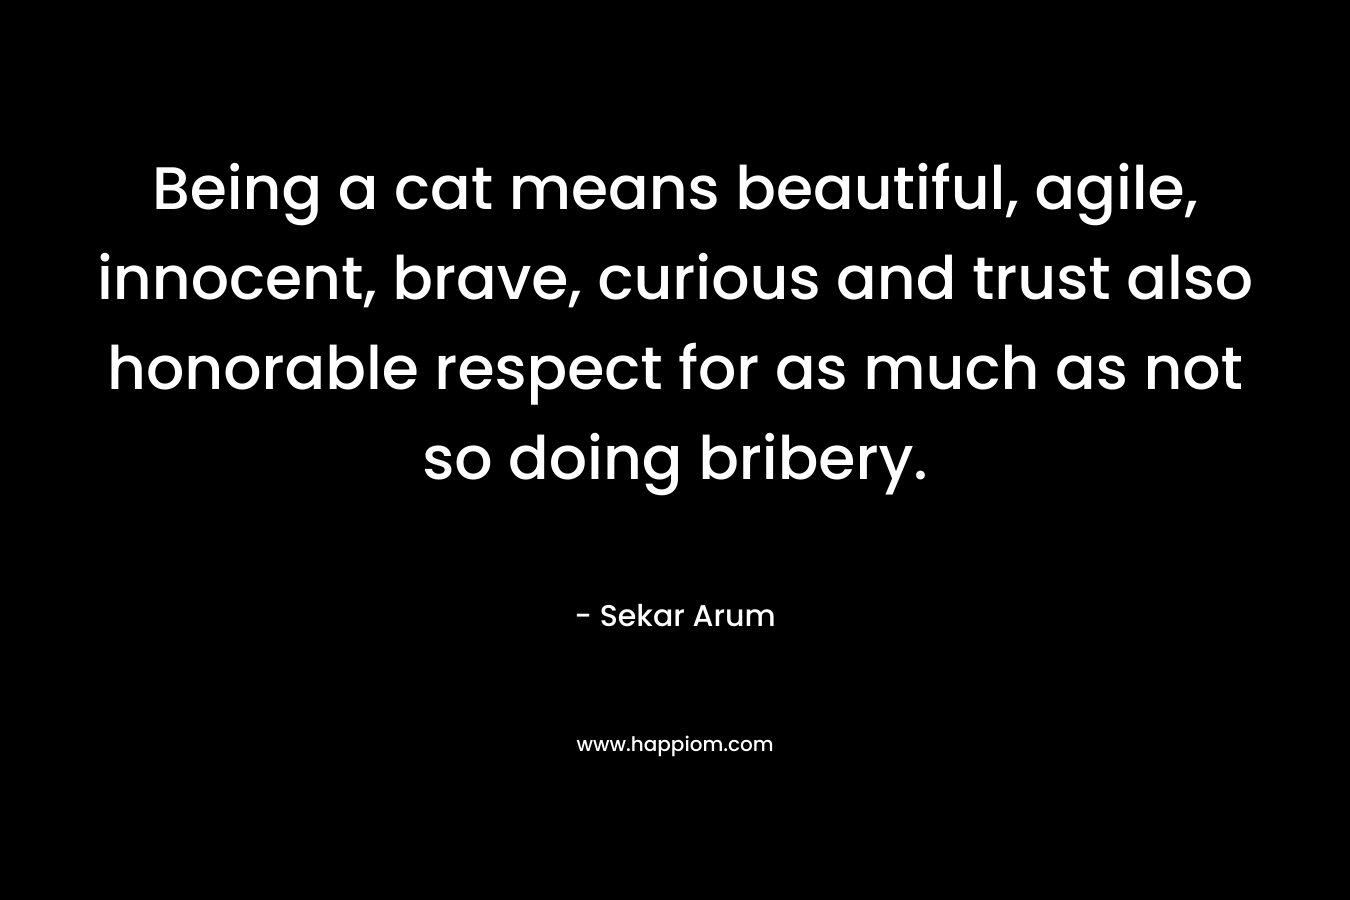 Being a cat means beautiful, agile, innocent, brave, curious and trust also honorable respect for as much as not so doing bribery. – Sekar Arum